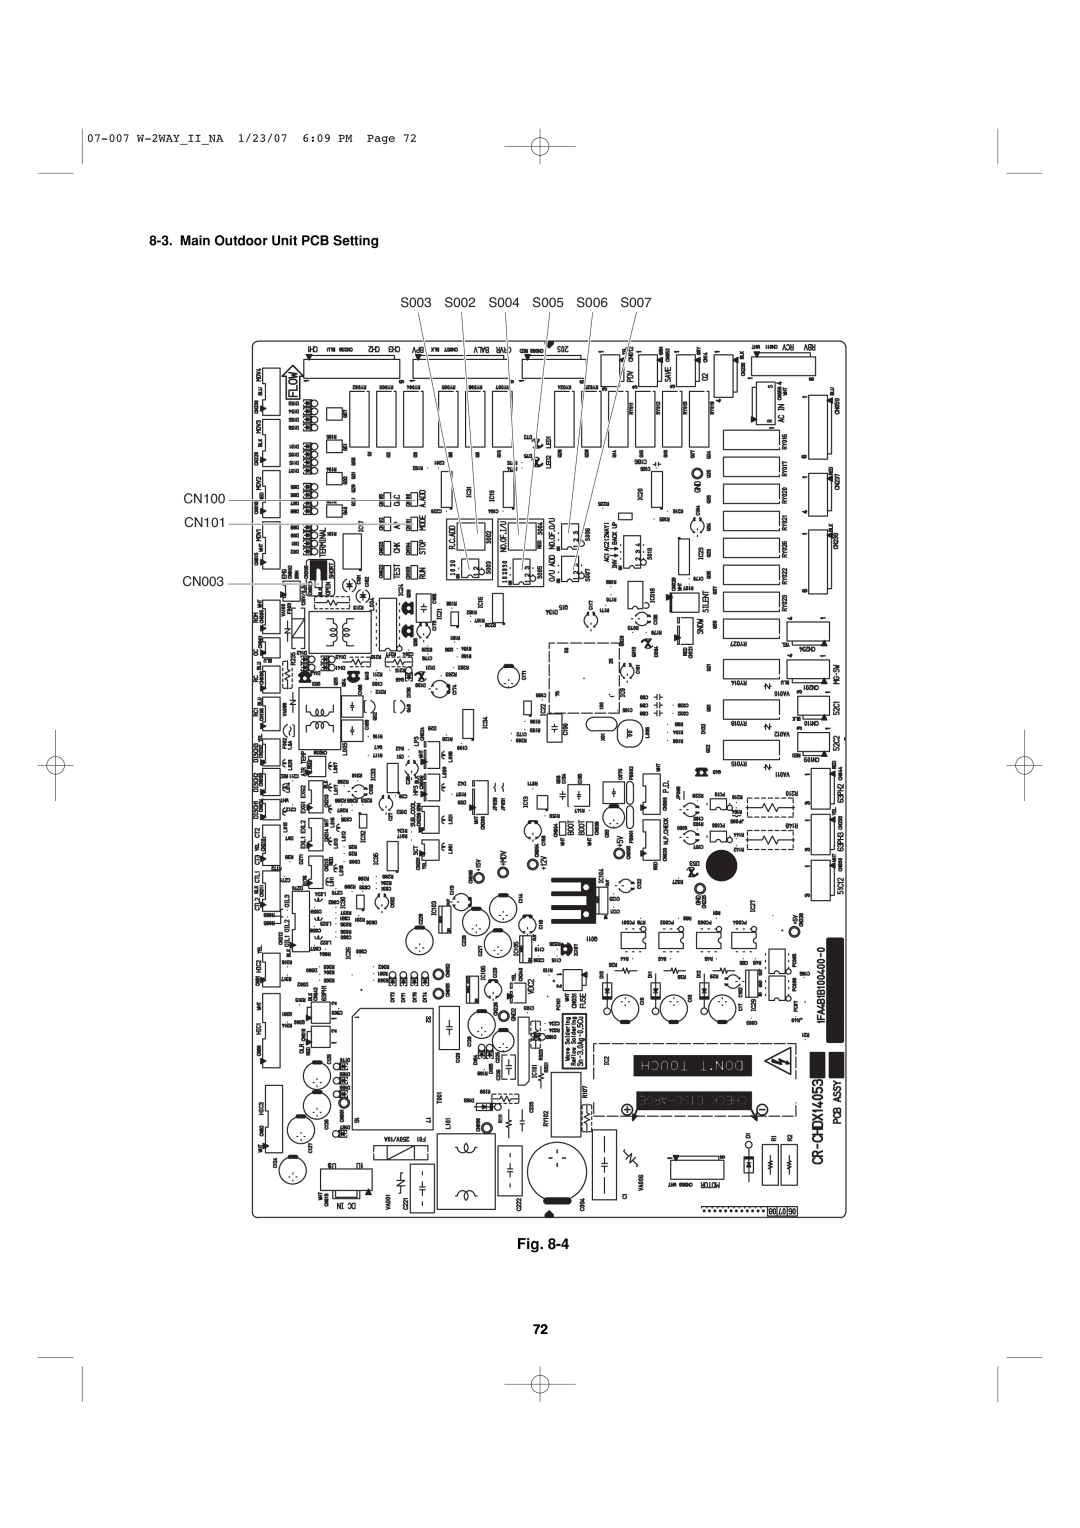 Sanyo 85464359982001 Fig, Main Outdoor Unit PCB Setting, S003 S002 S004 S005 S006 S007 CN100 CN101 CN003 